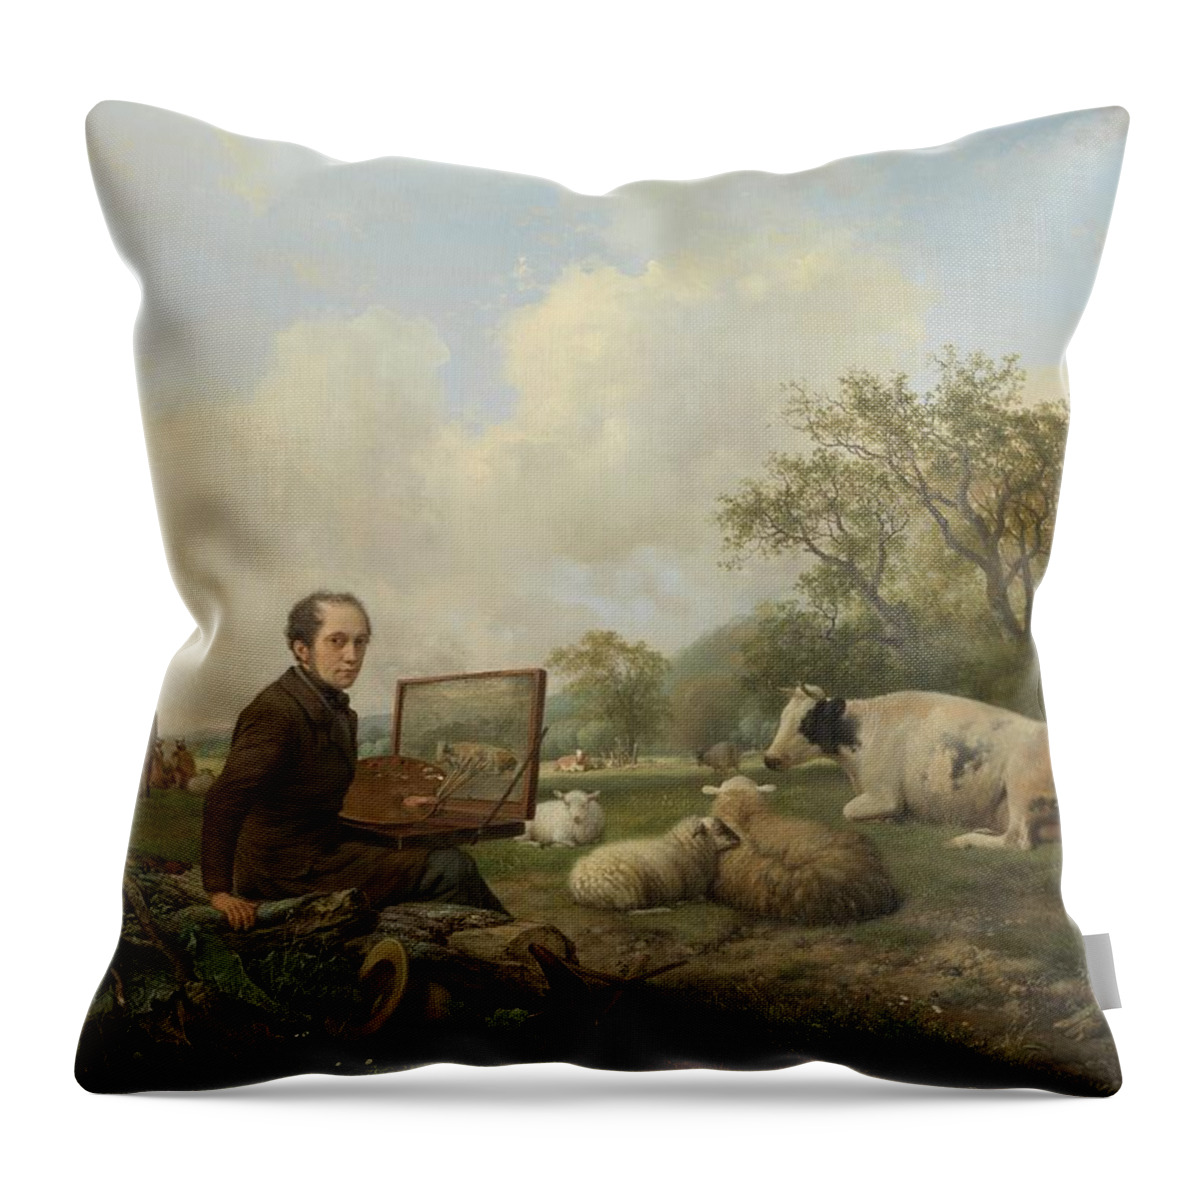 Agriculture Throw Pillow featuring the painting The Artist Painting A Cow In A Meadow, 1850 by Hendrikus Van De Sande Bakhuyzen